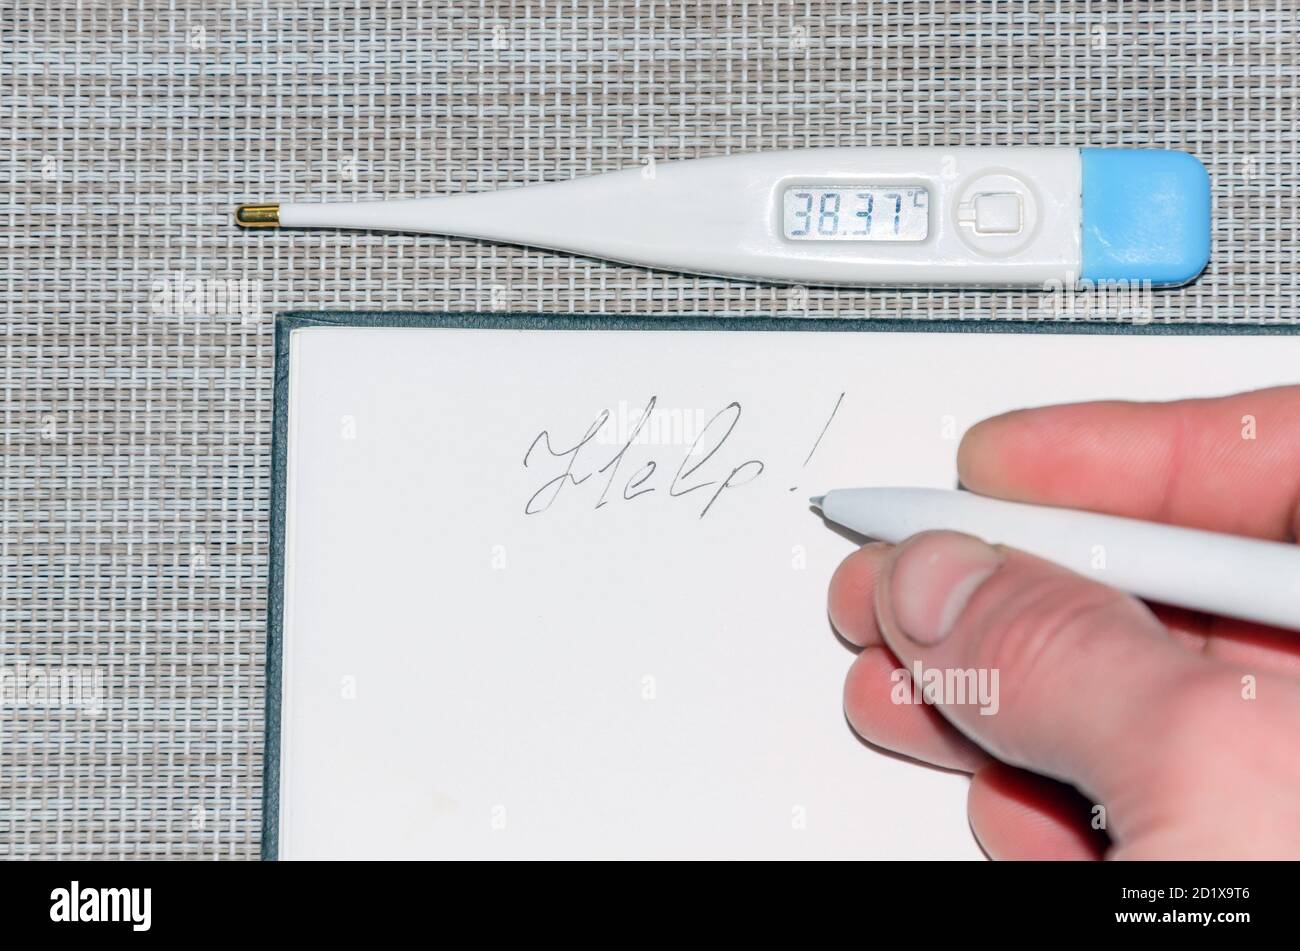 A thermometer with temperature readings and a note in the notebook for help. Stock Photo